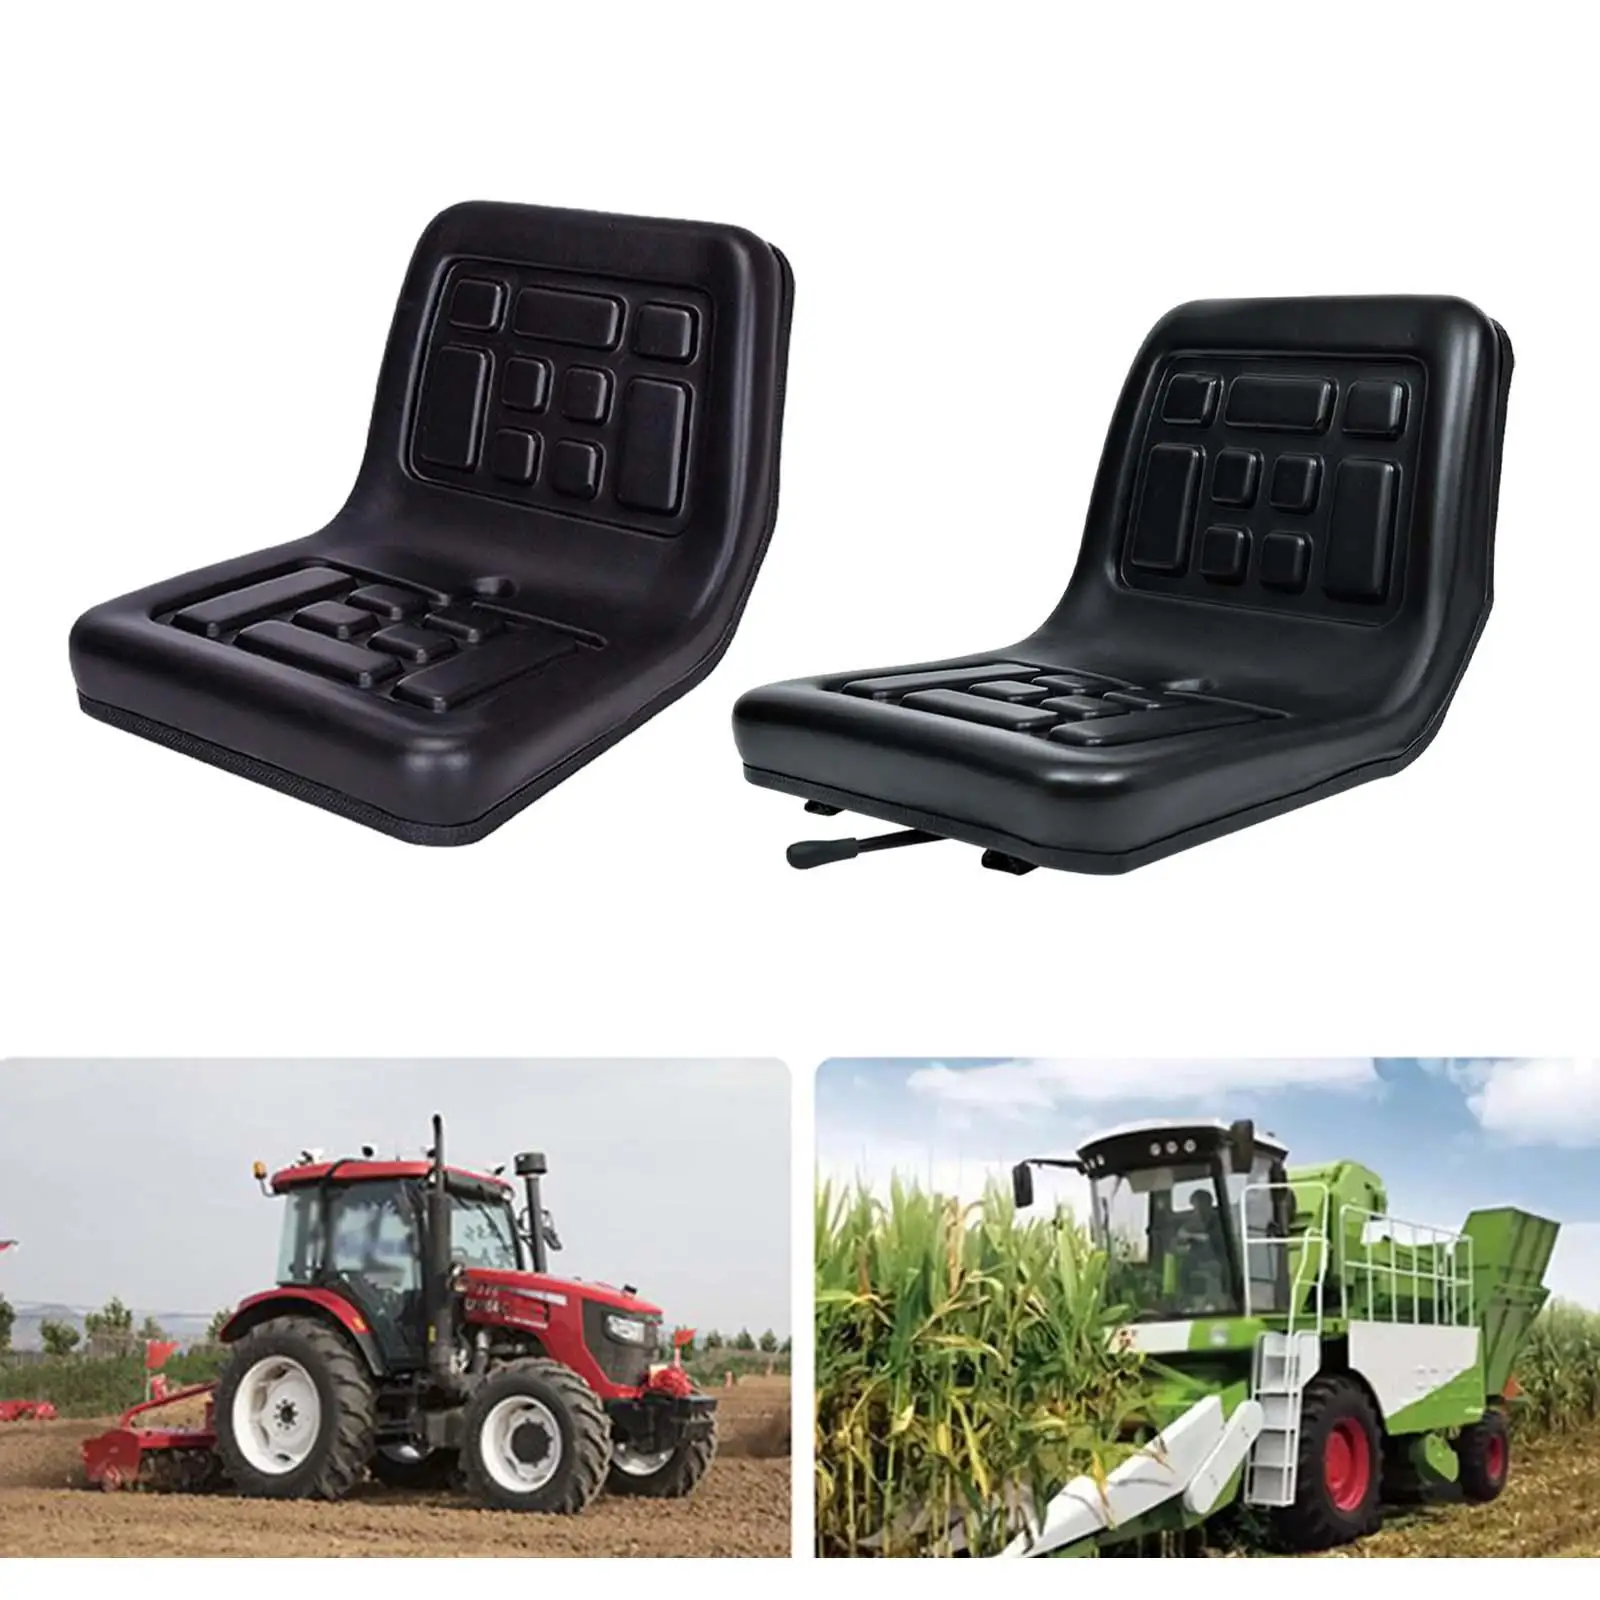 Tractor Seat Water Resistant Wear Resistant Harvesters Seat for Loader Rice Transplanters Road Sweepers Vehicles Excavator